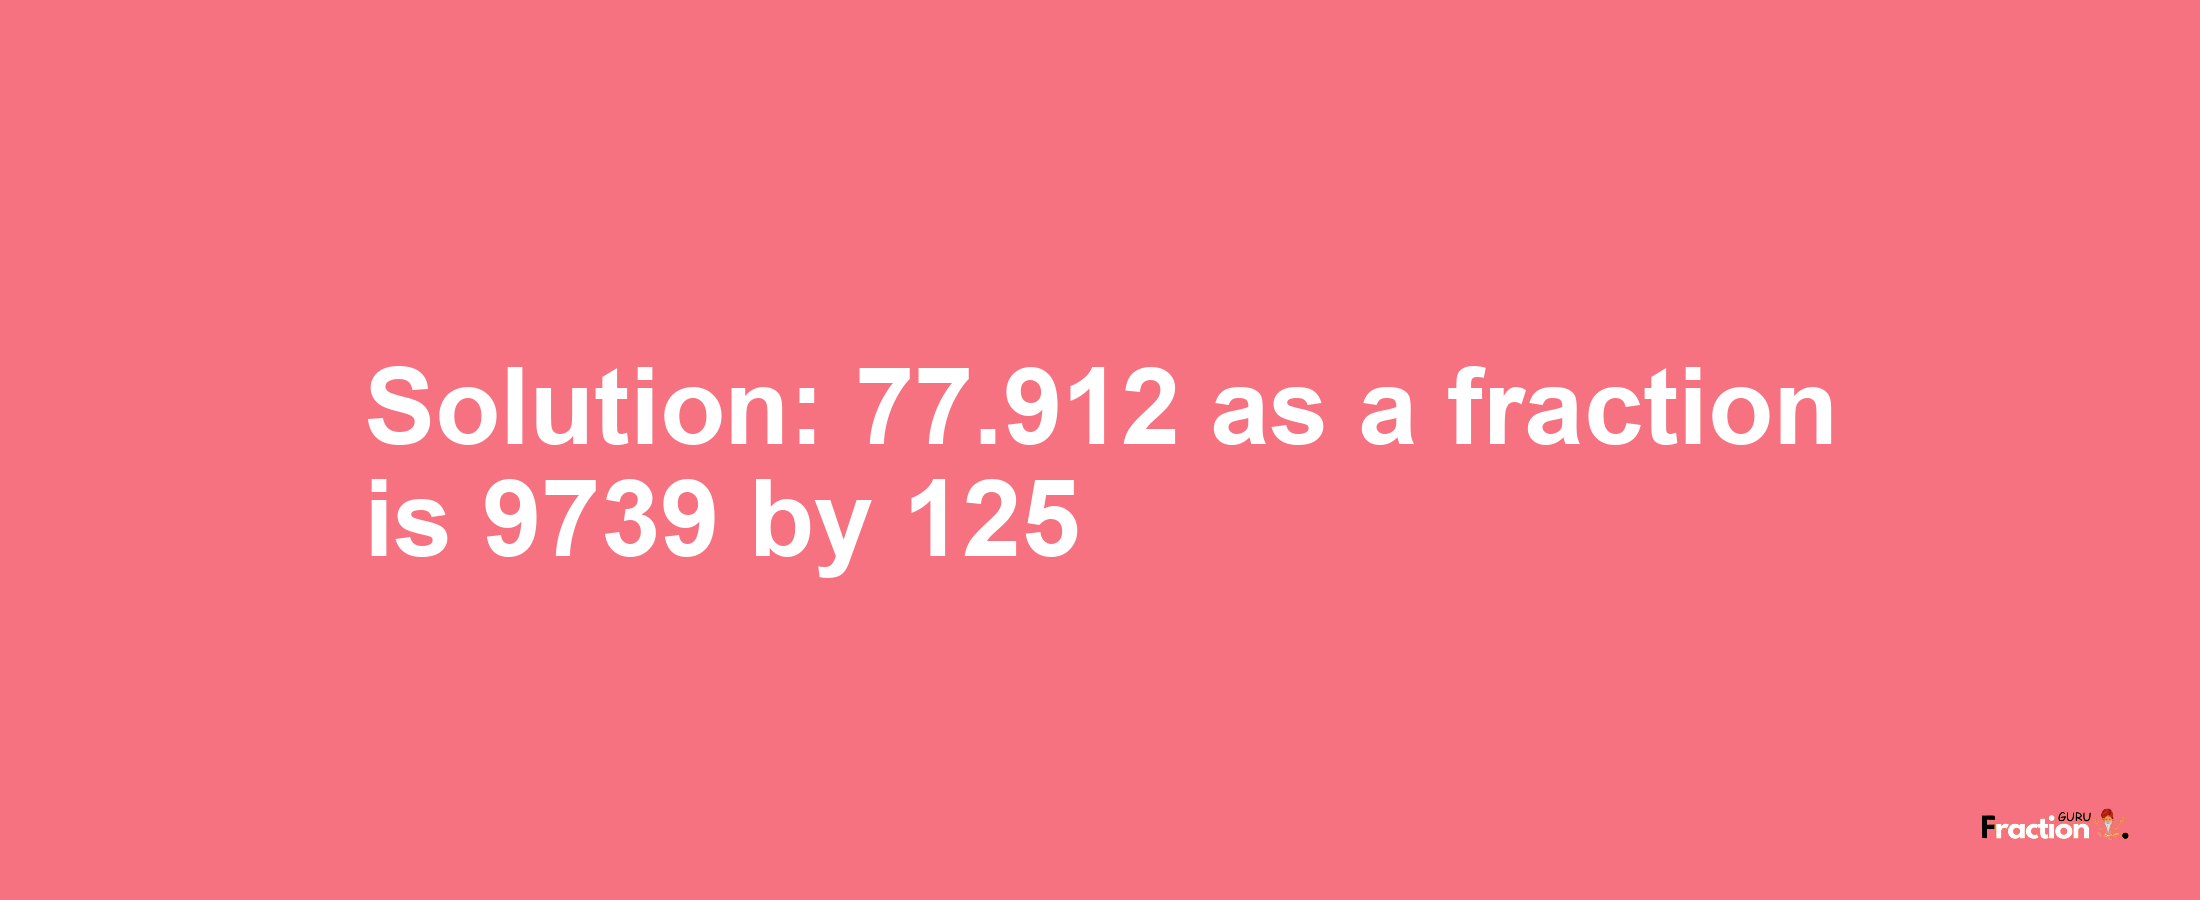 Solution:77.912 as a fraction is 9739/125